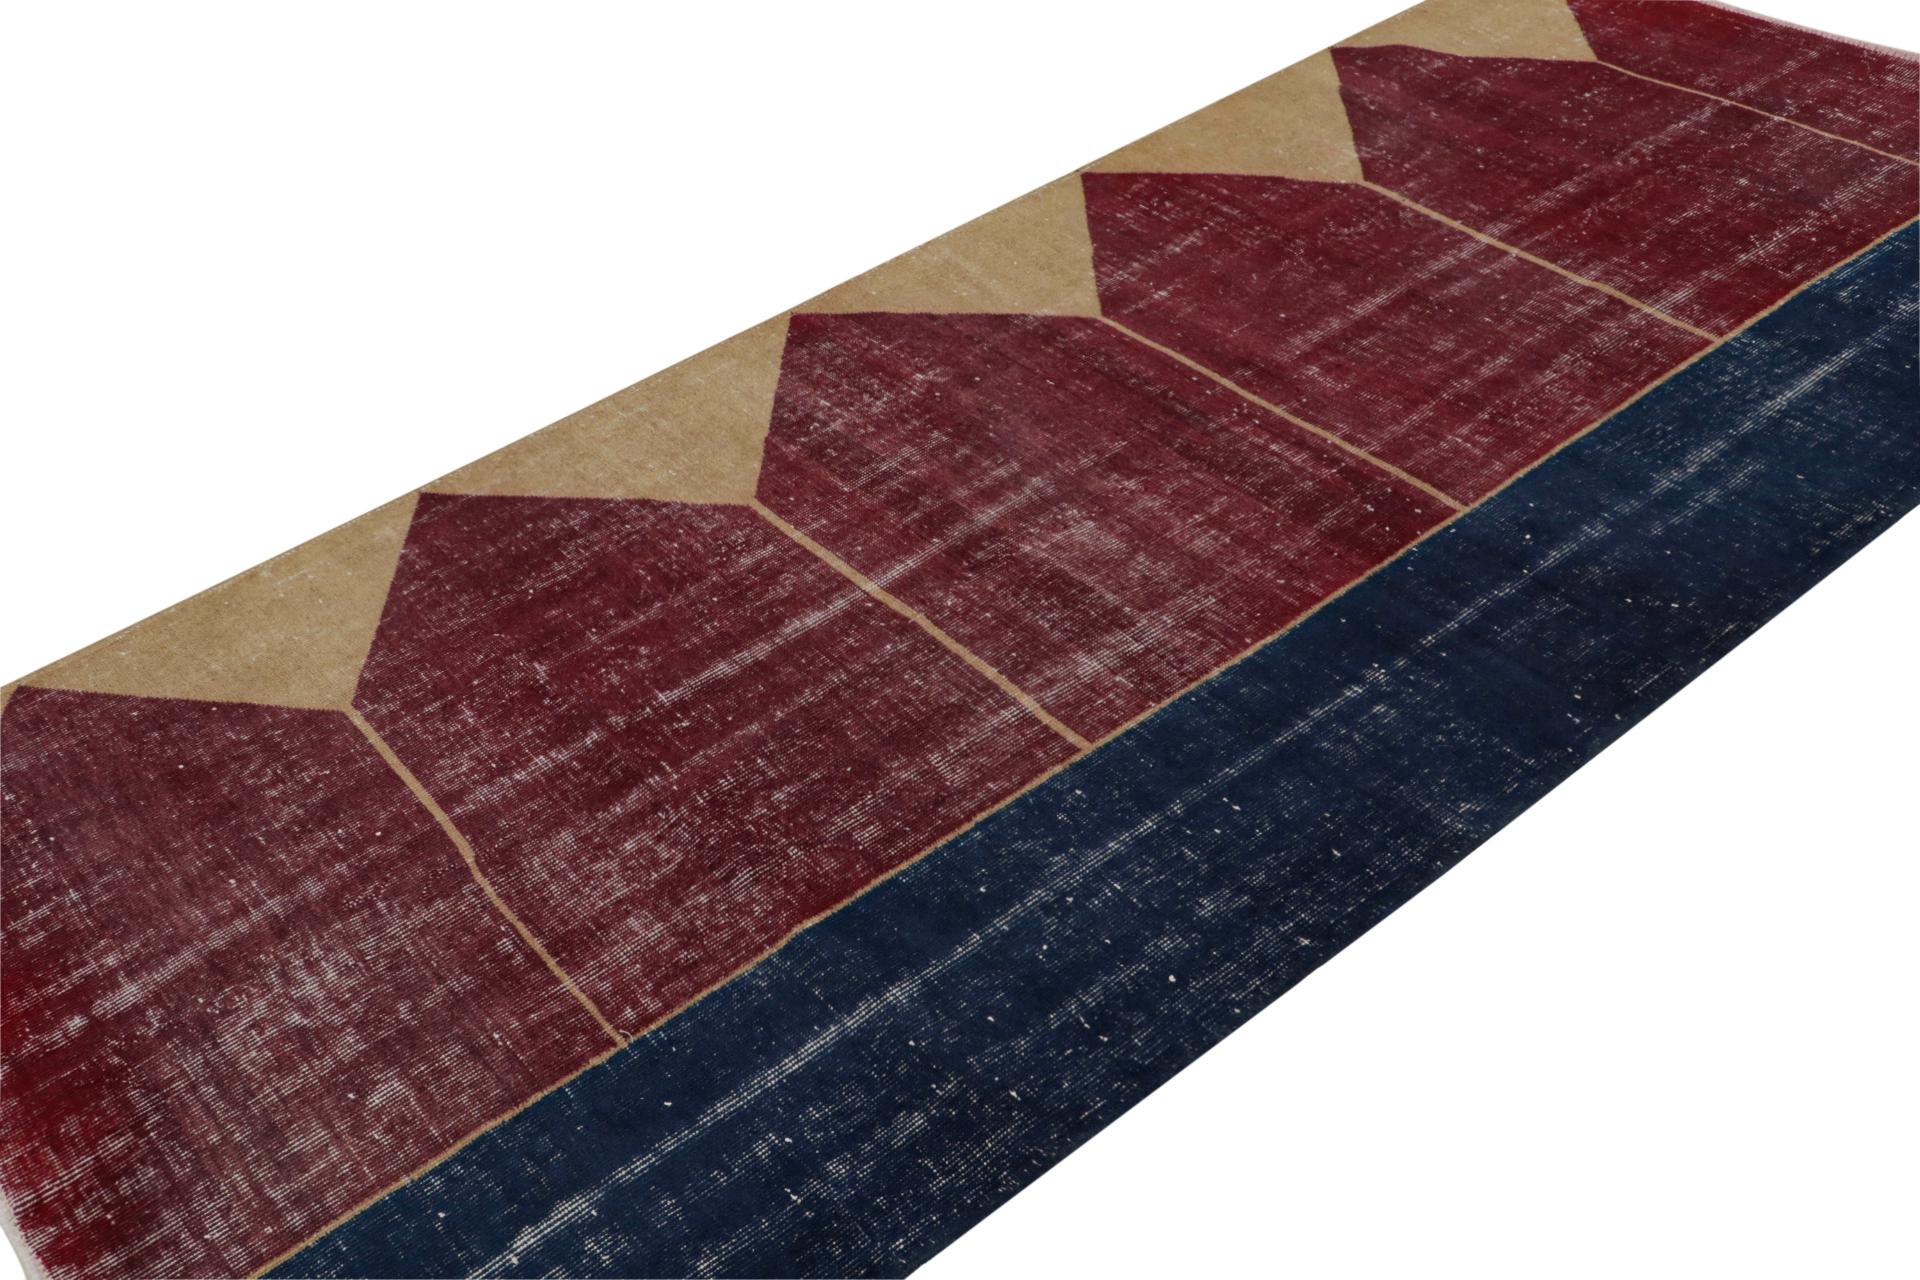 Hand Knotted in wool, this distressed vintage 4x9 Turkish rug, which is inspired by Saf rugs, a particular kind of prayer rug, features a red field and geometric patterns in hues of bronze and navy blue.  

On the Design: 

Connoisseurs will admire